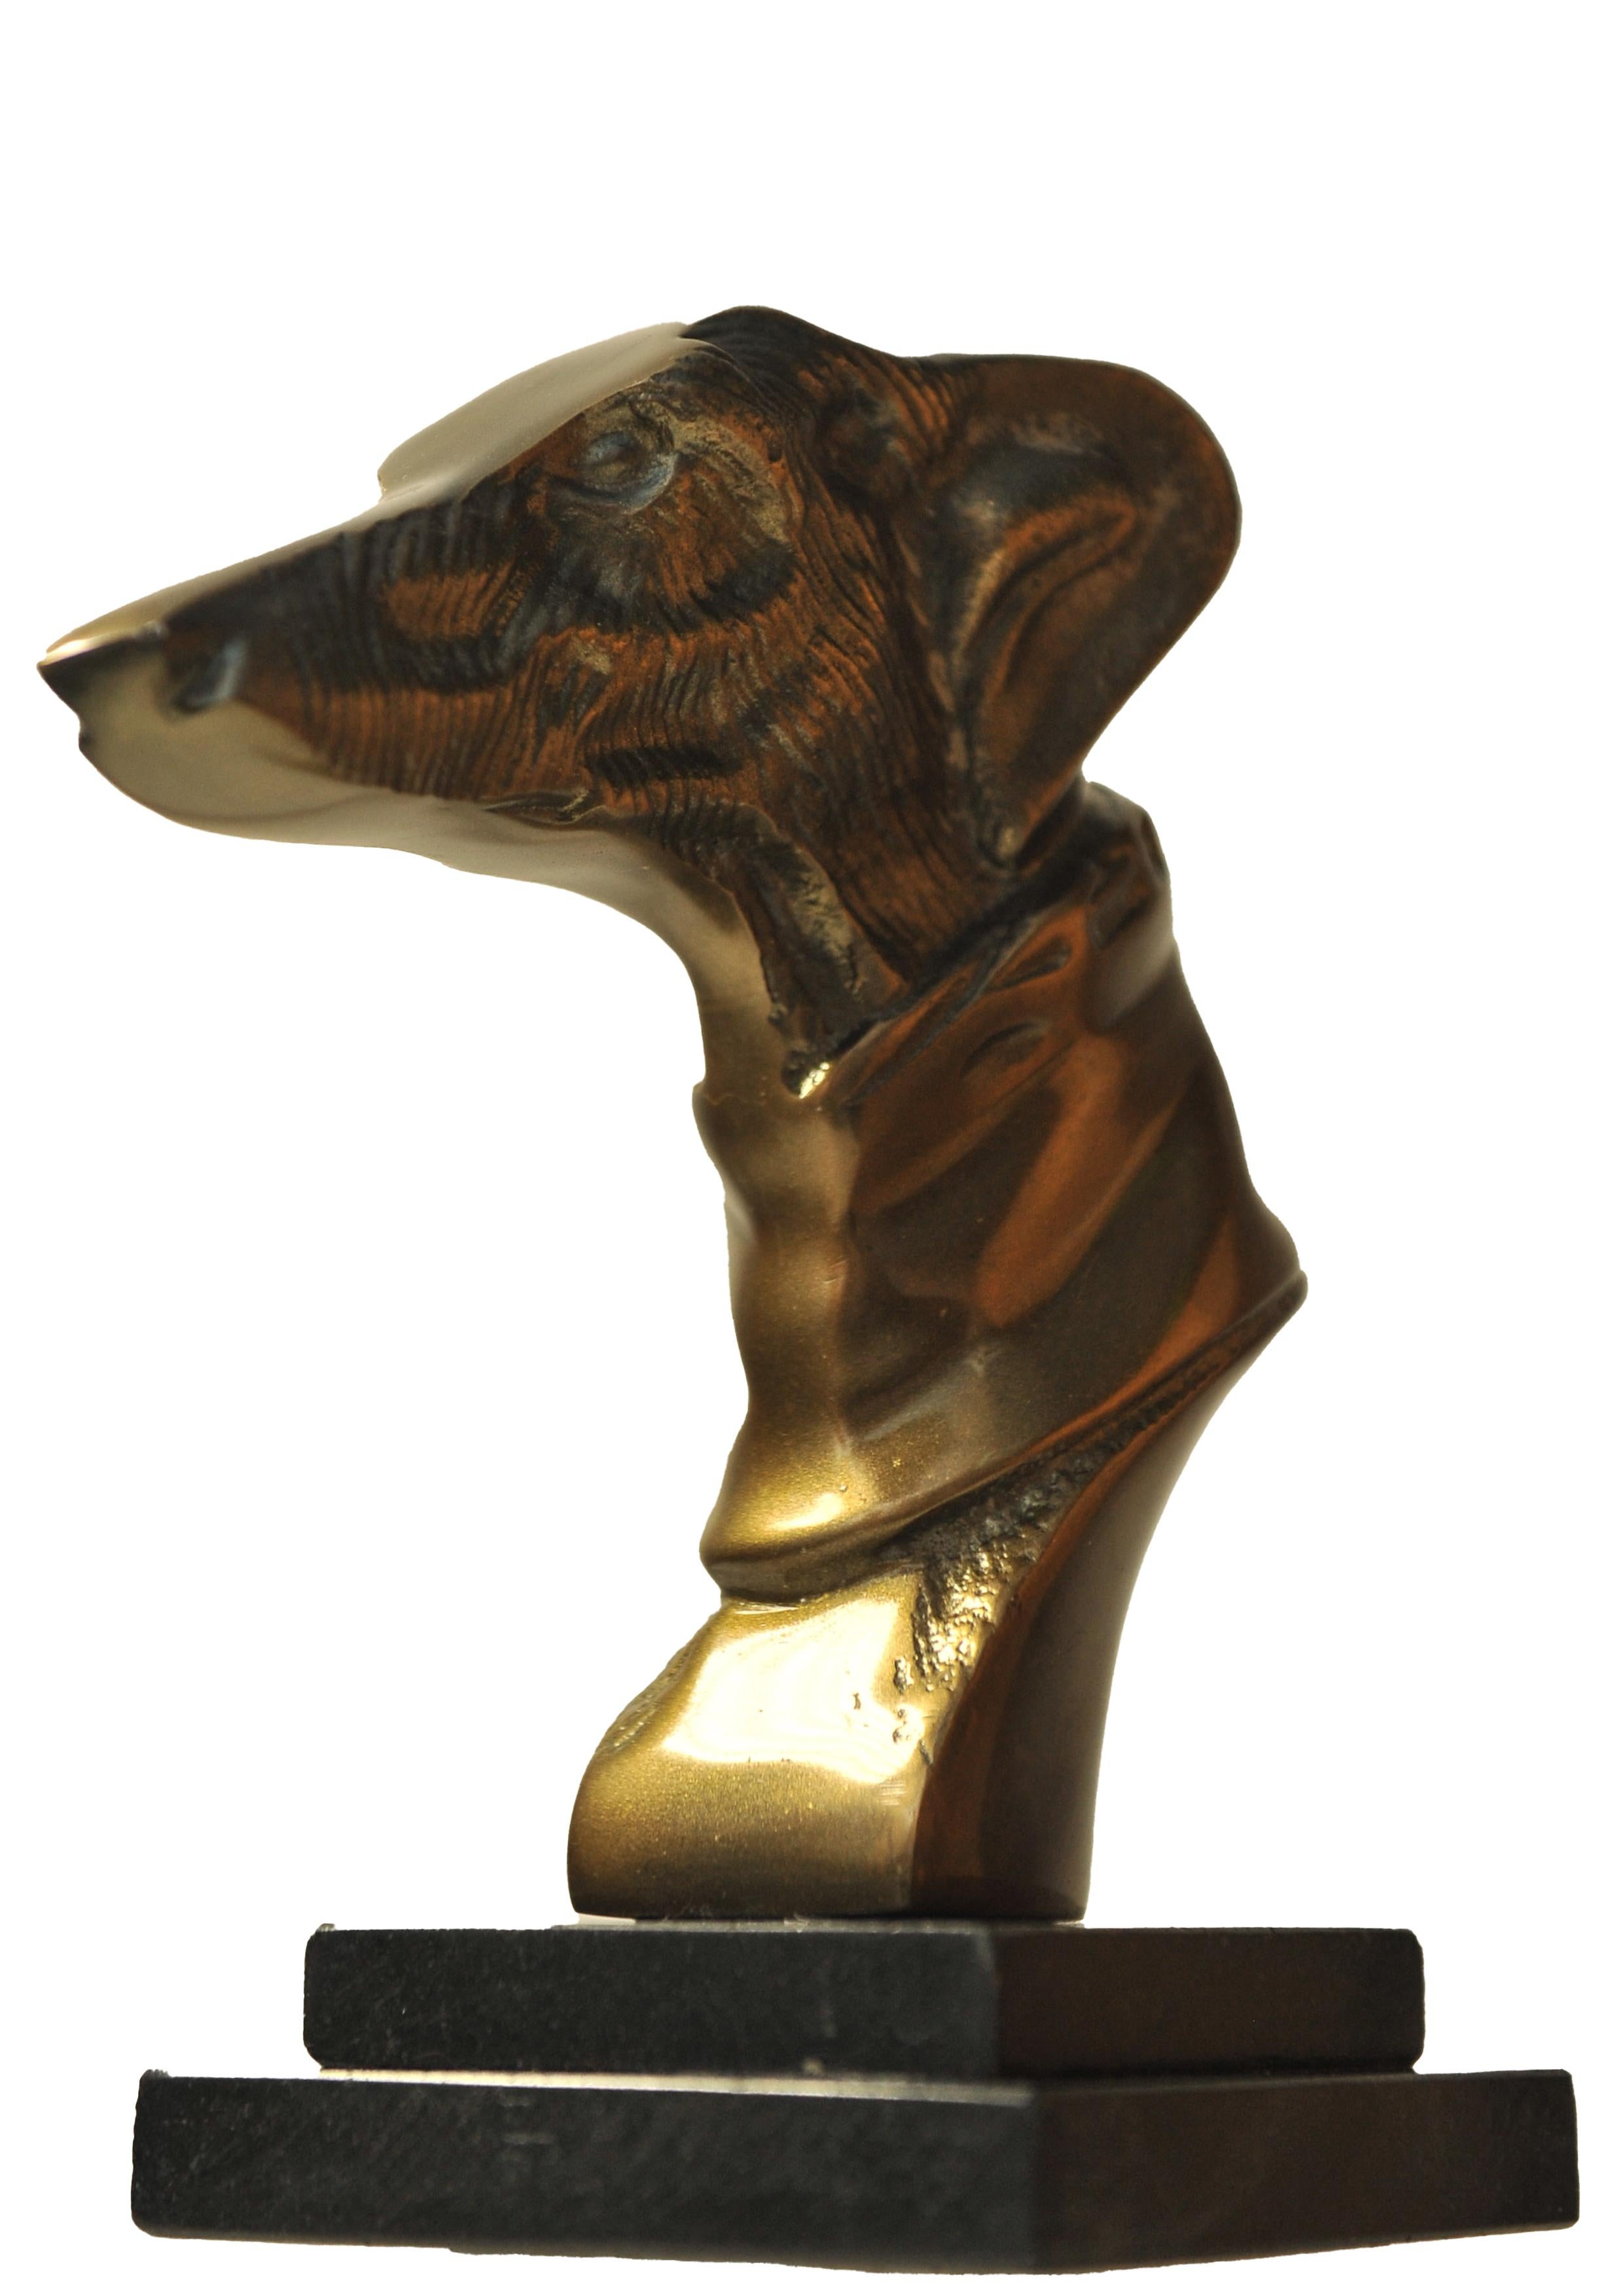 Art Deco Greyhound Bronze Figurehead On Plinth Ideal For Desk Paperweight Or Decoration. For Sale